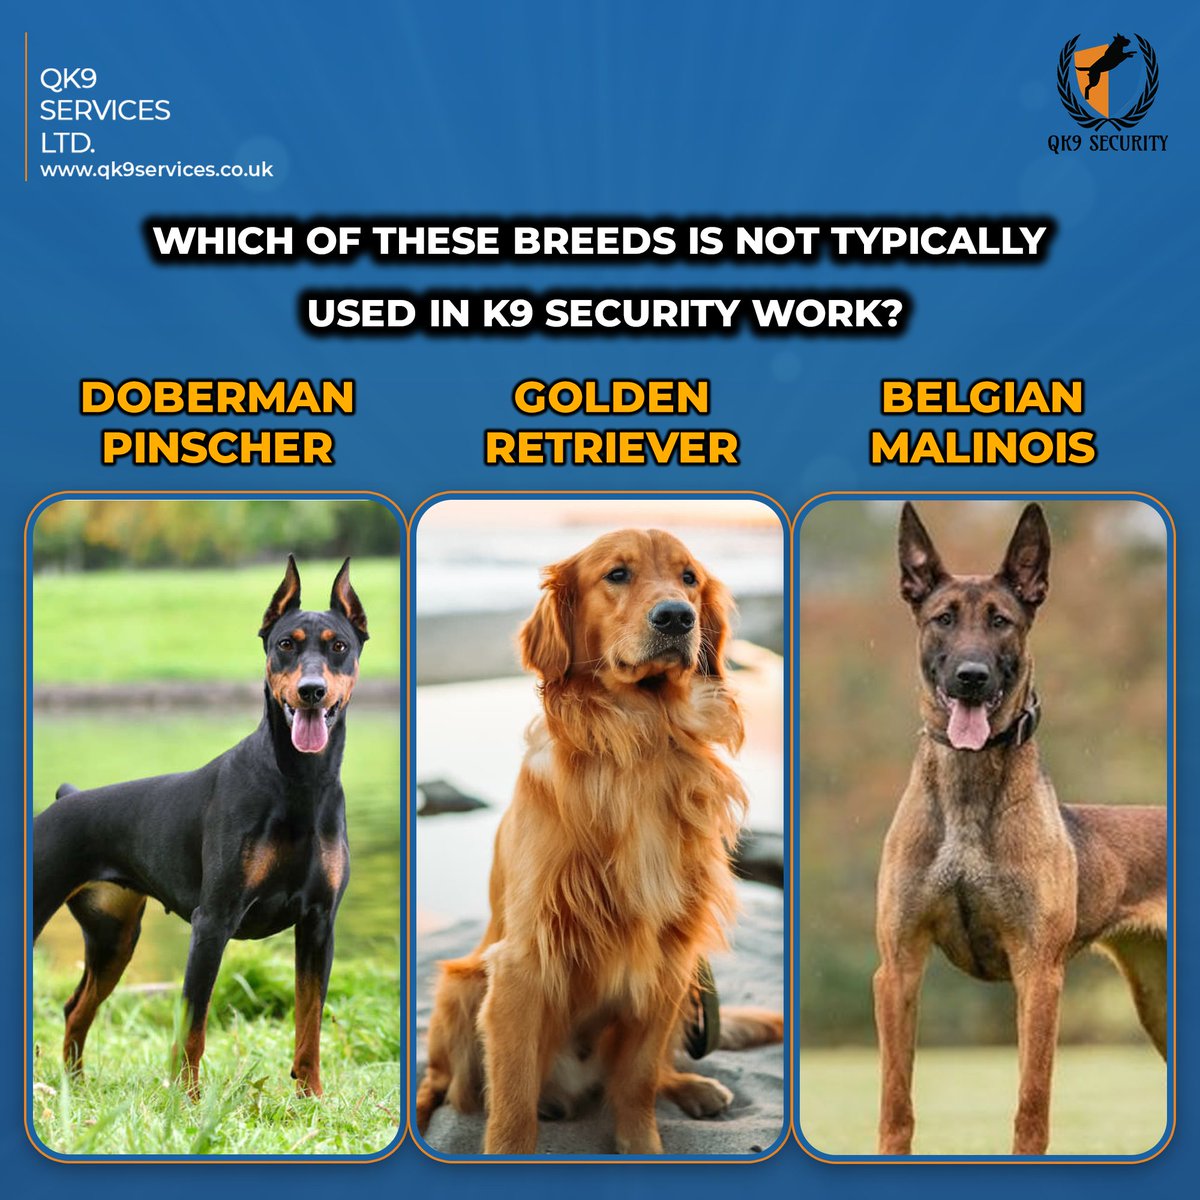 Which of these breeds is NOT typically used in K9 security work?
.
.
.
.
#K9Security #WorkingDogs #DogBreeds #BassetHound #NotSecurityMaterial #ScentDetection #qk9